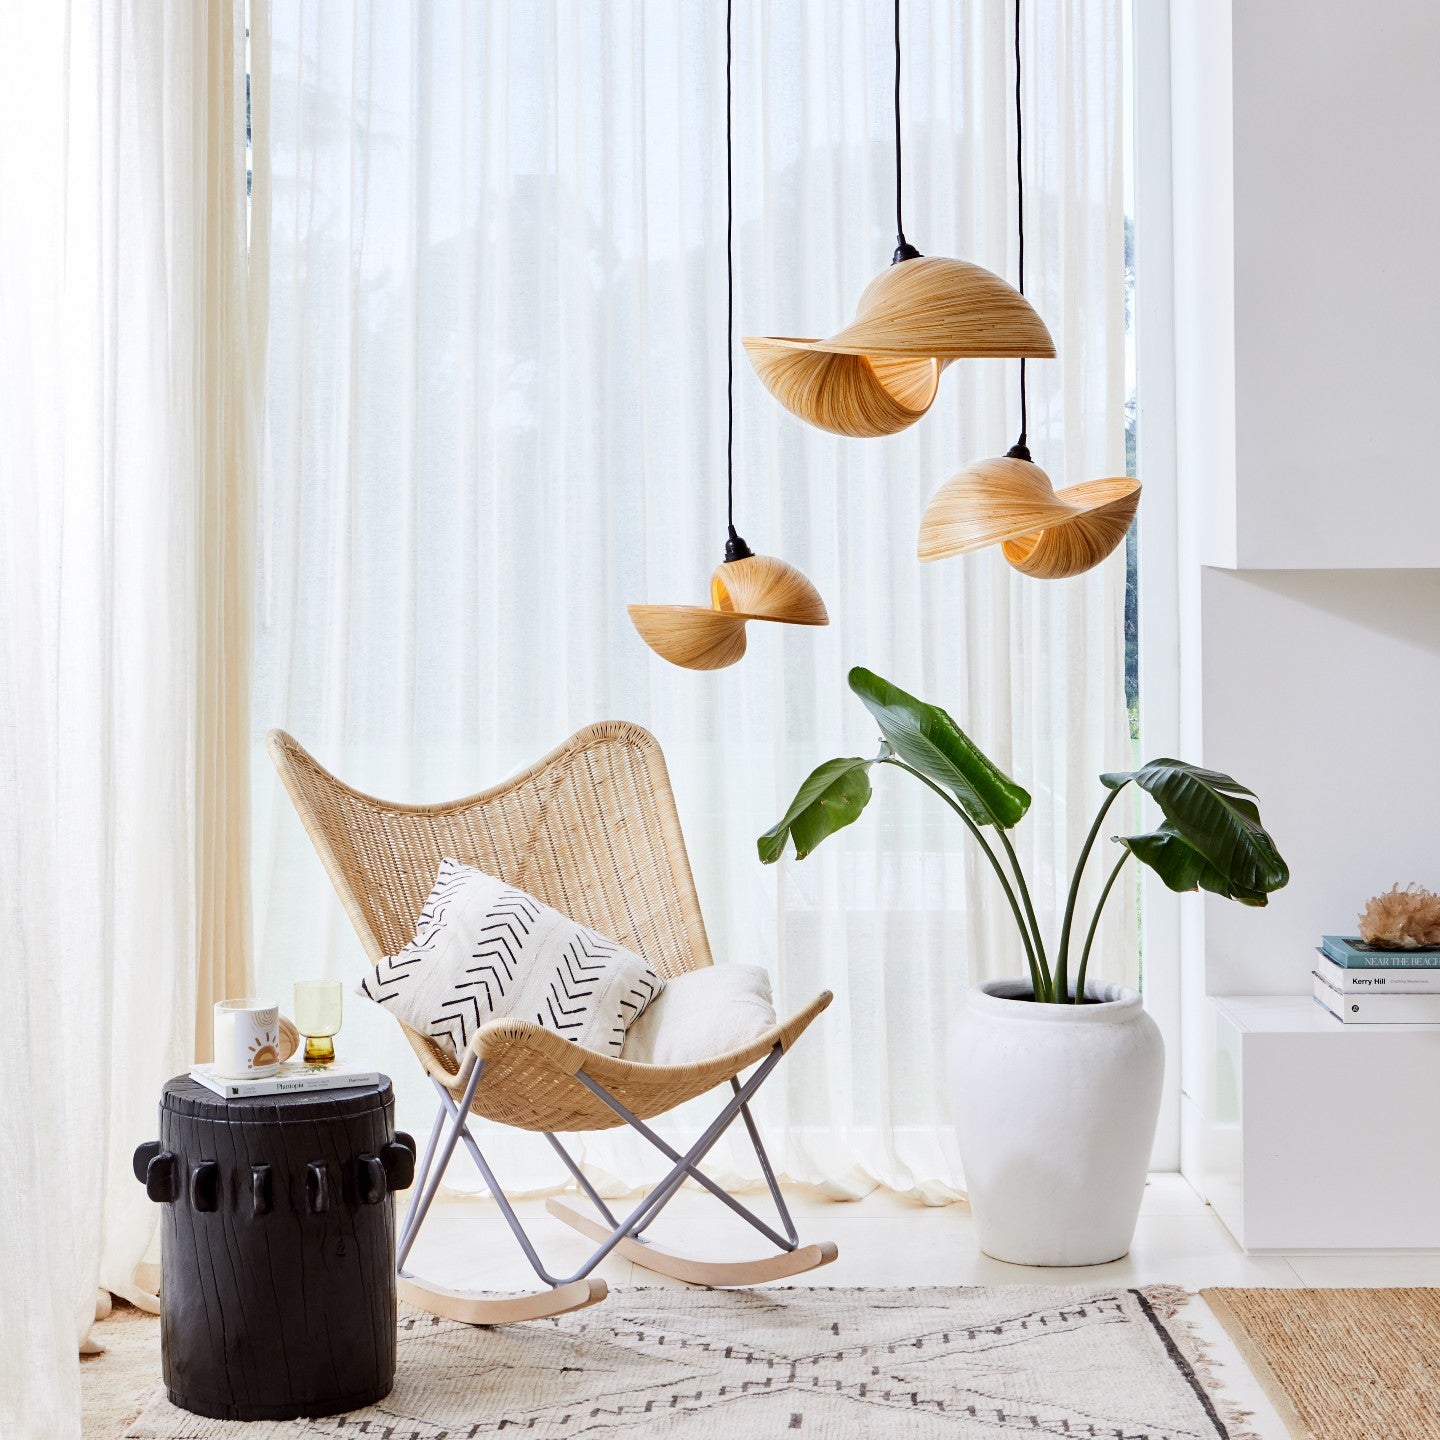 three-bamboo-pendant-light-shades-with-wicker-rocking-chair-and-sheer-curtains-in-stylish-living-room